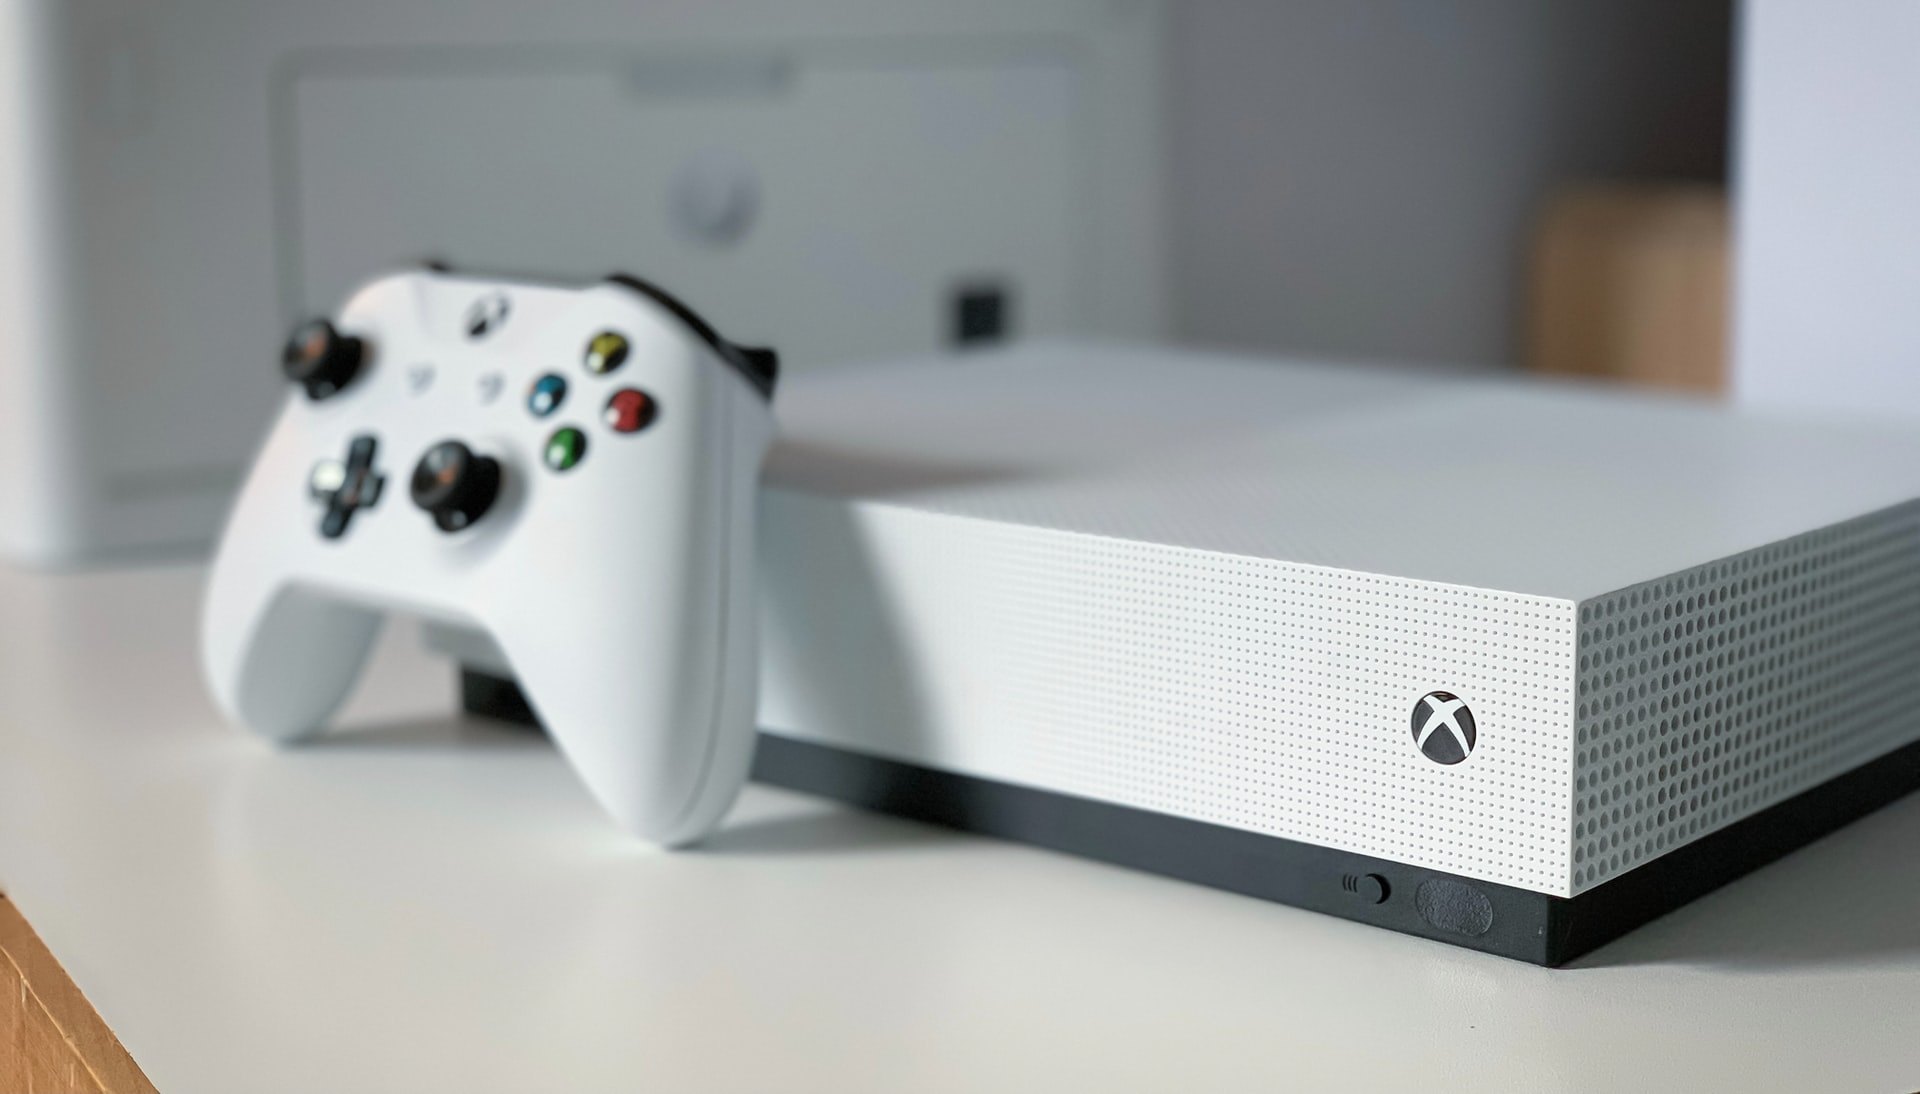 Best Selling Xbox One Games - See Here